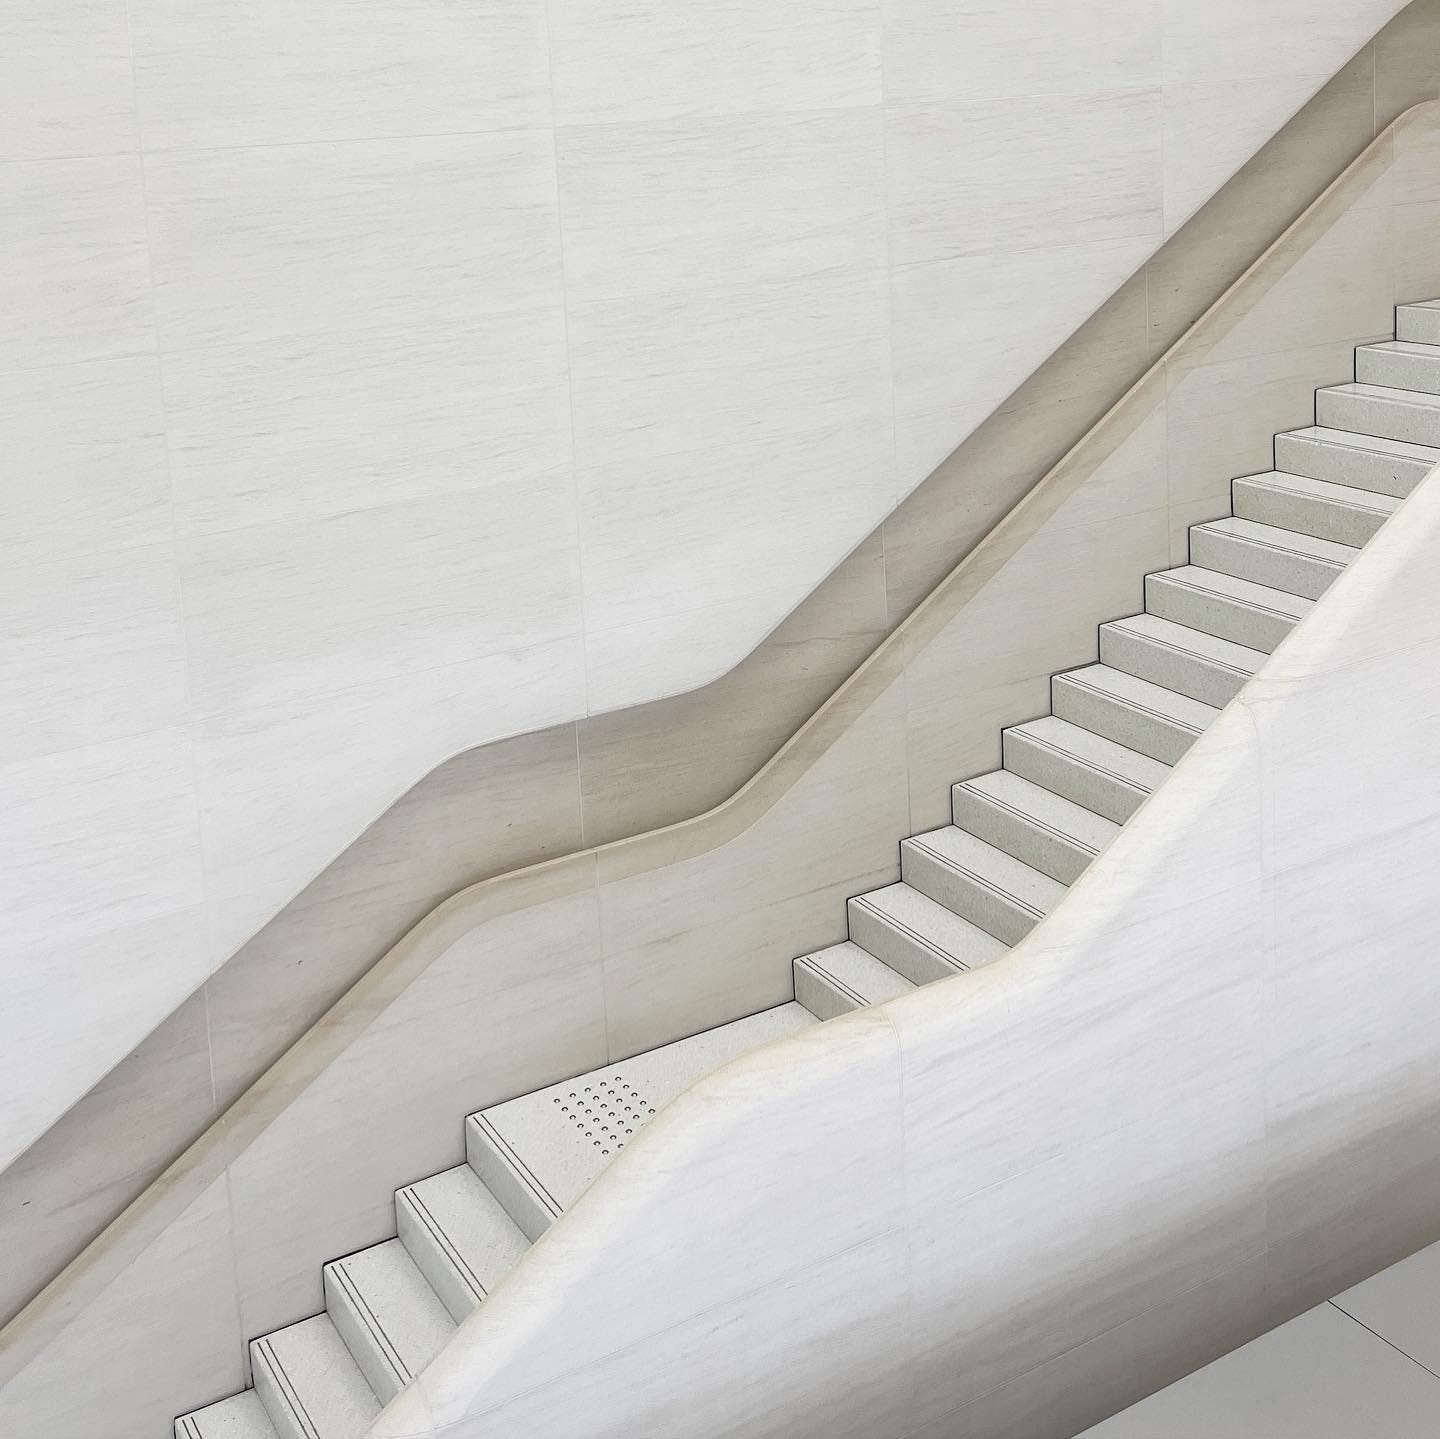 The sculptural stone staircase at Apple Kyoto.